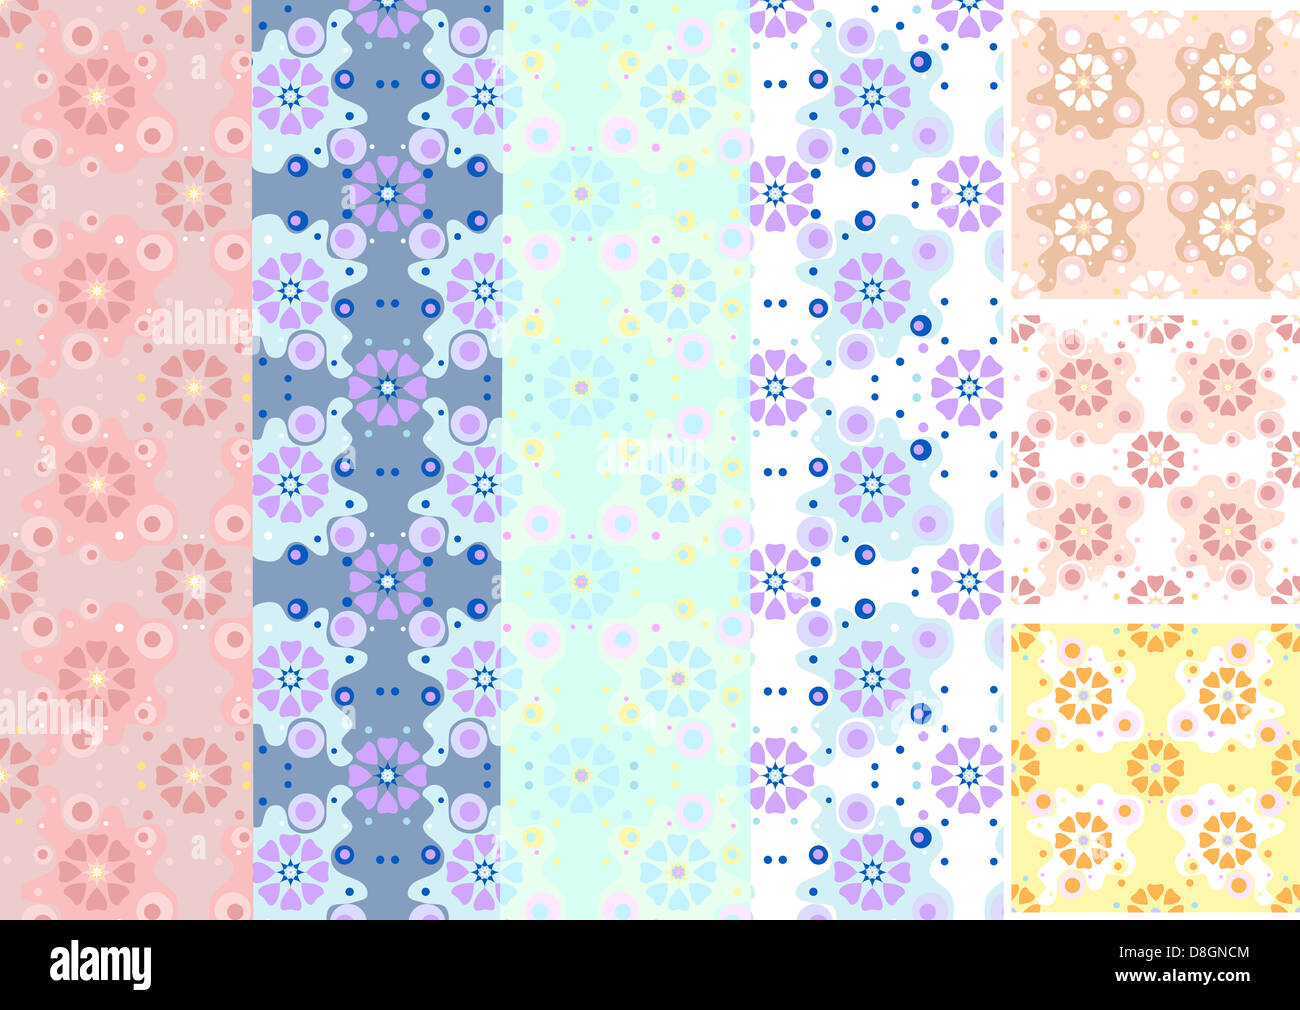 Options shades seamless floral pattern Stock Photo